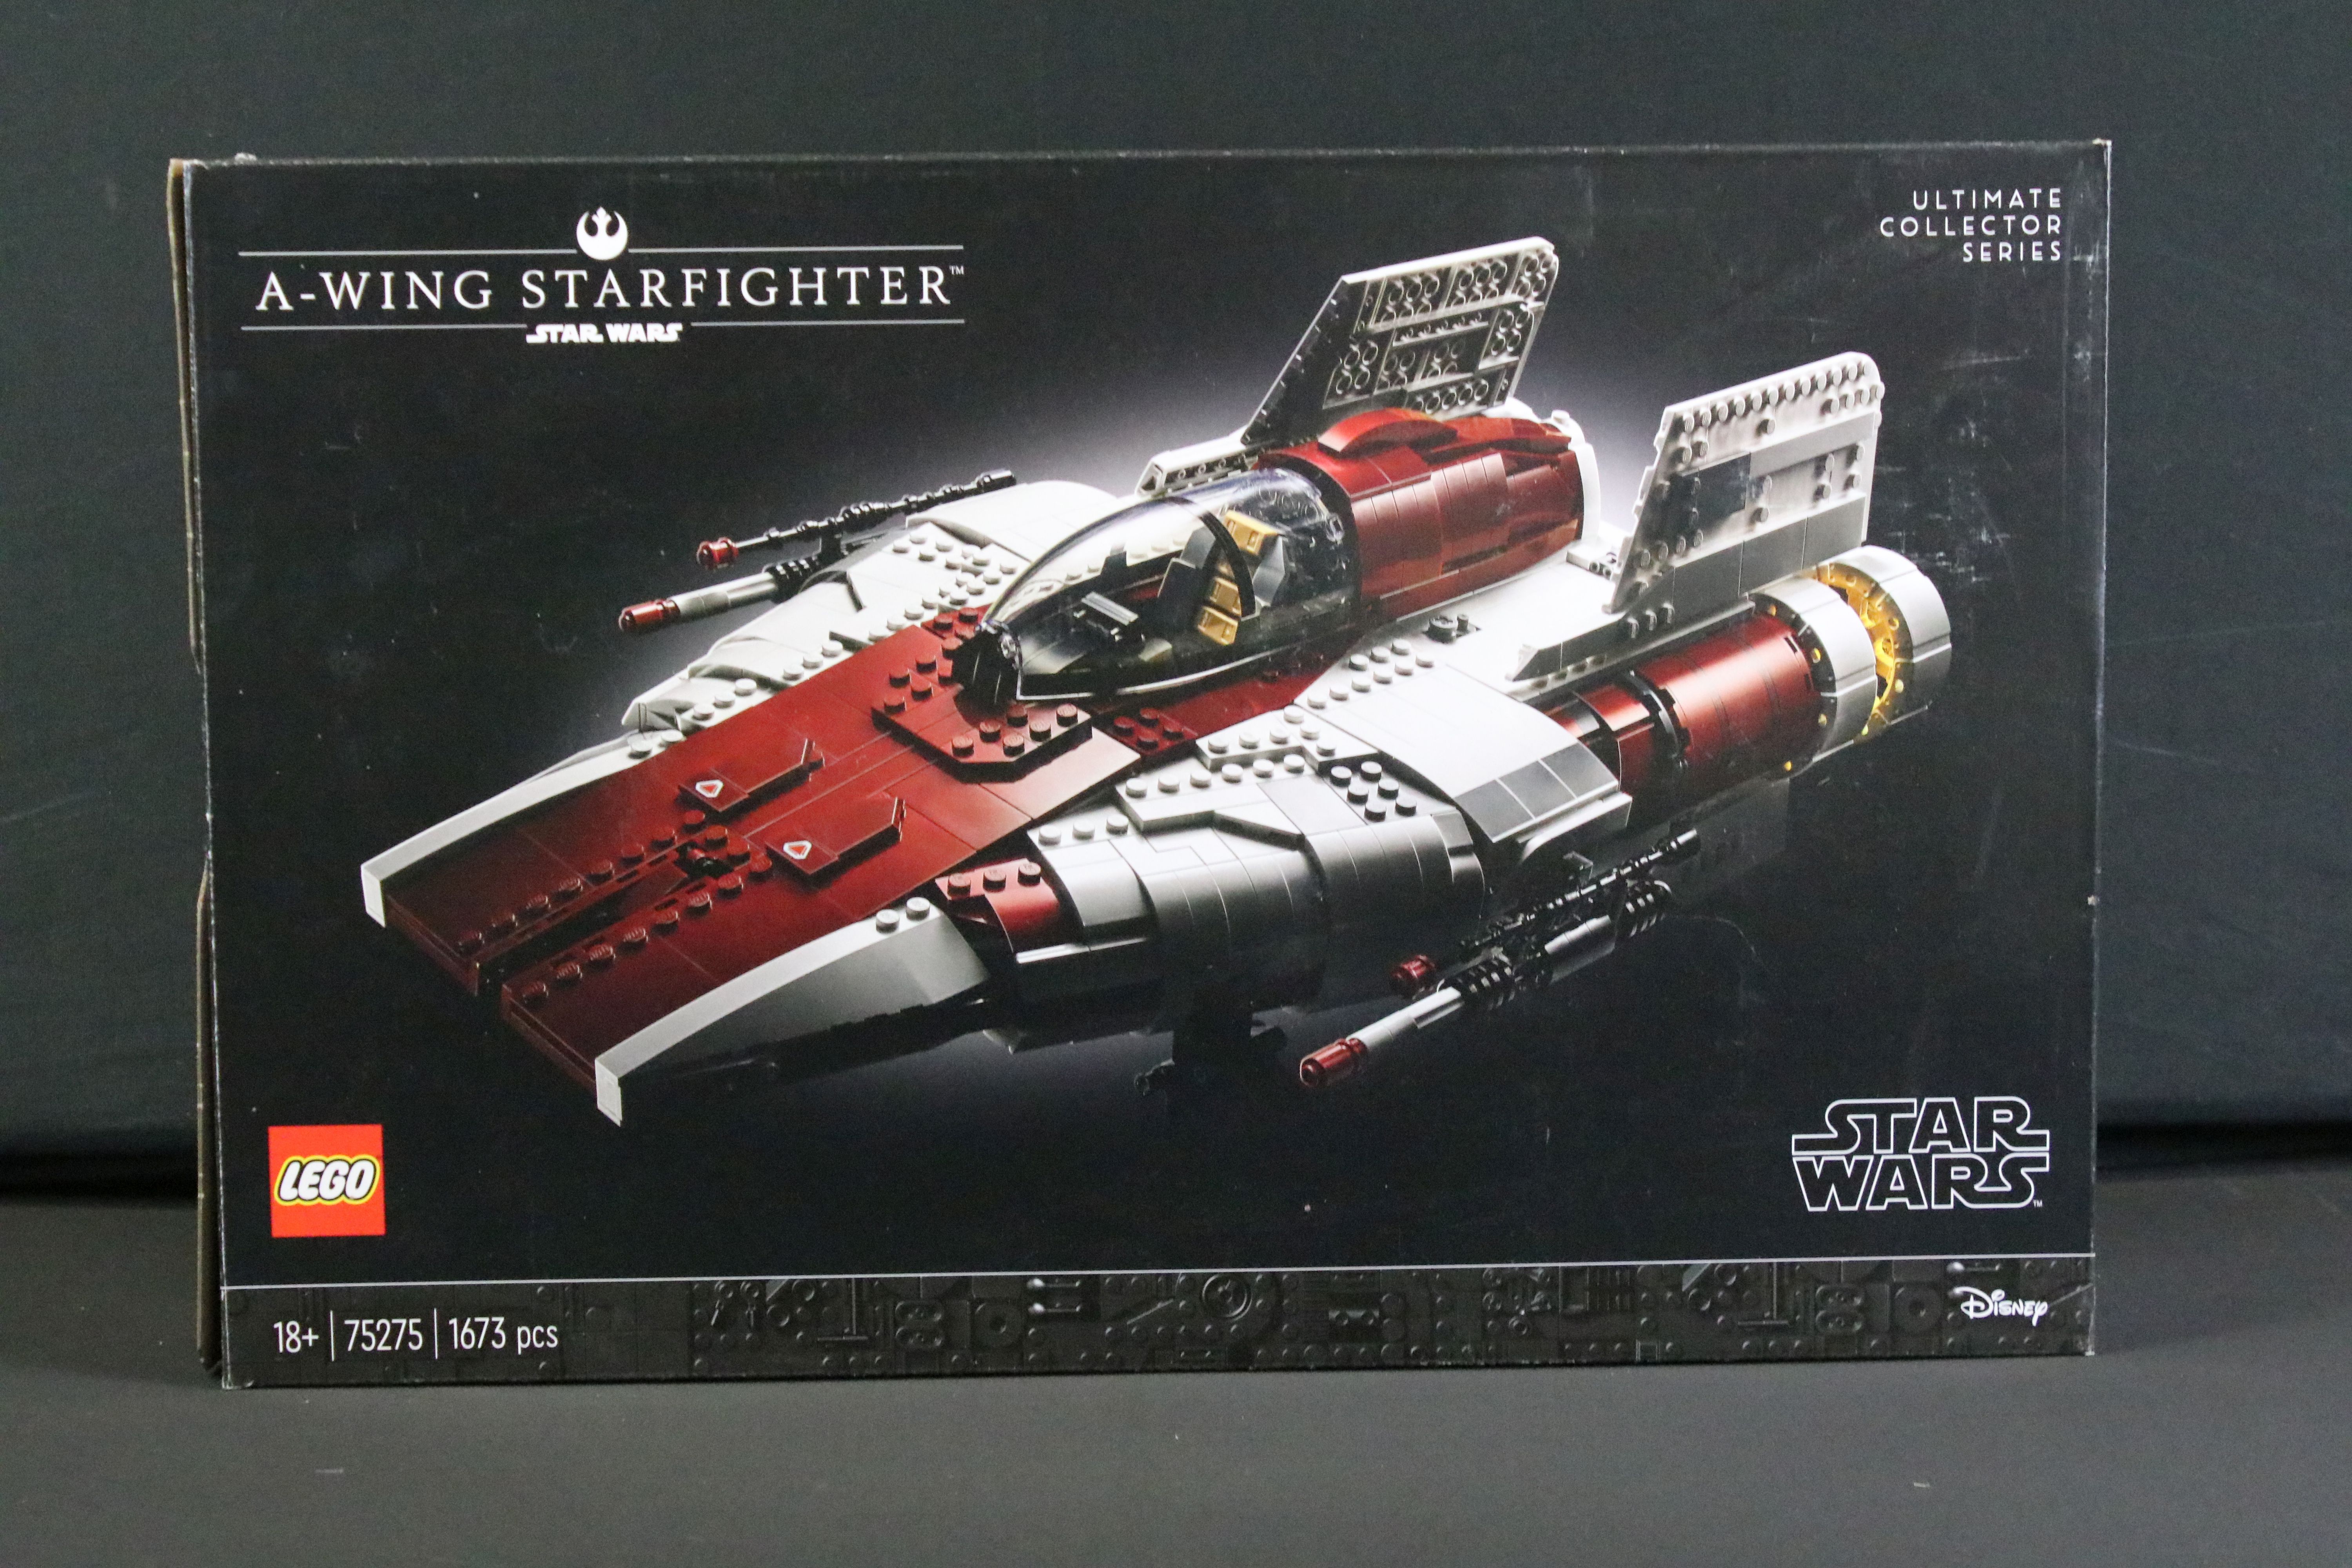 Lego - Boxed 75275 Star Wars Ultimate Collectors Series A-Wing Starfighter set, contents sealed